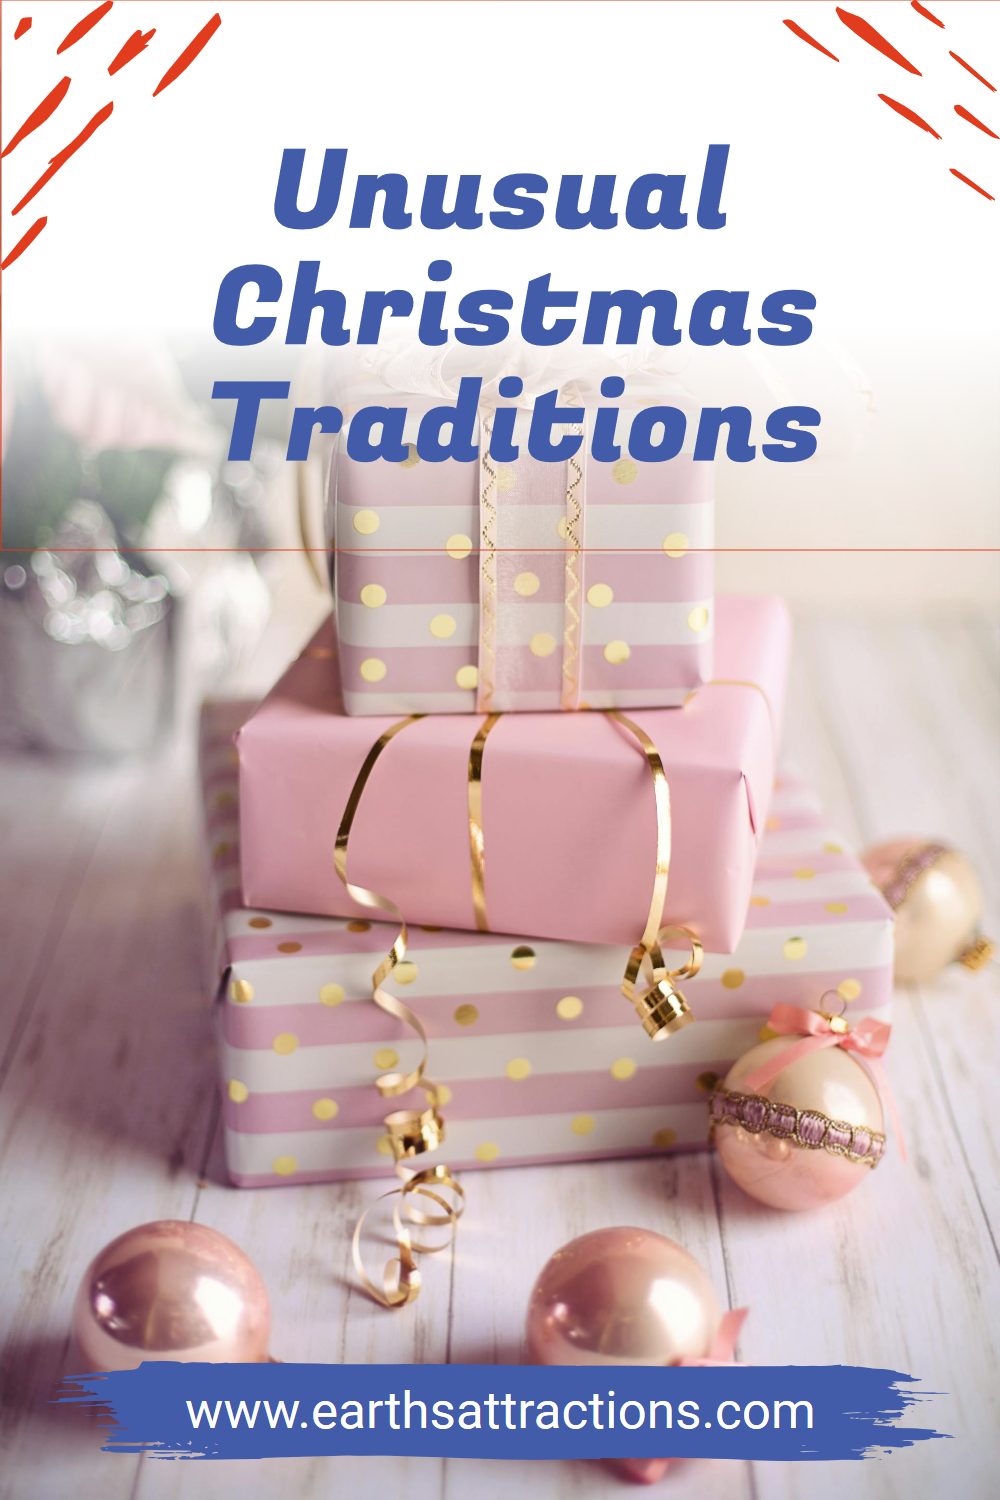 Surprising Christmas celebrations worldwide. Read this article to see 11 unique Christmas traditions across continents. Fact-checked information! #christmas #christmastraditions #christmascelebrations #christmascustoms #quirkychristmas #usa #europe #japan #holidays #winterholidays 